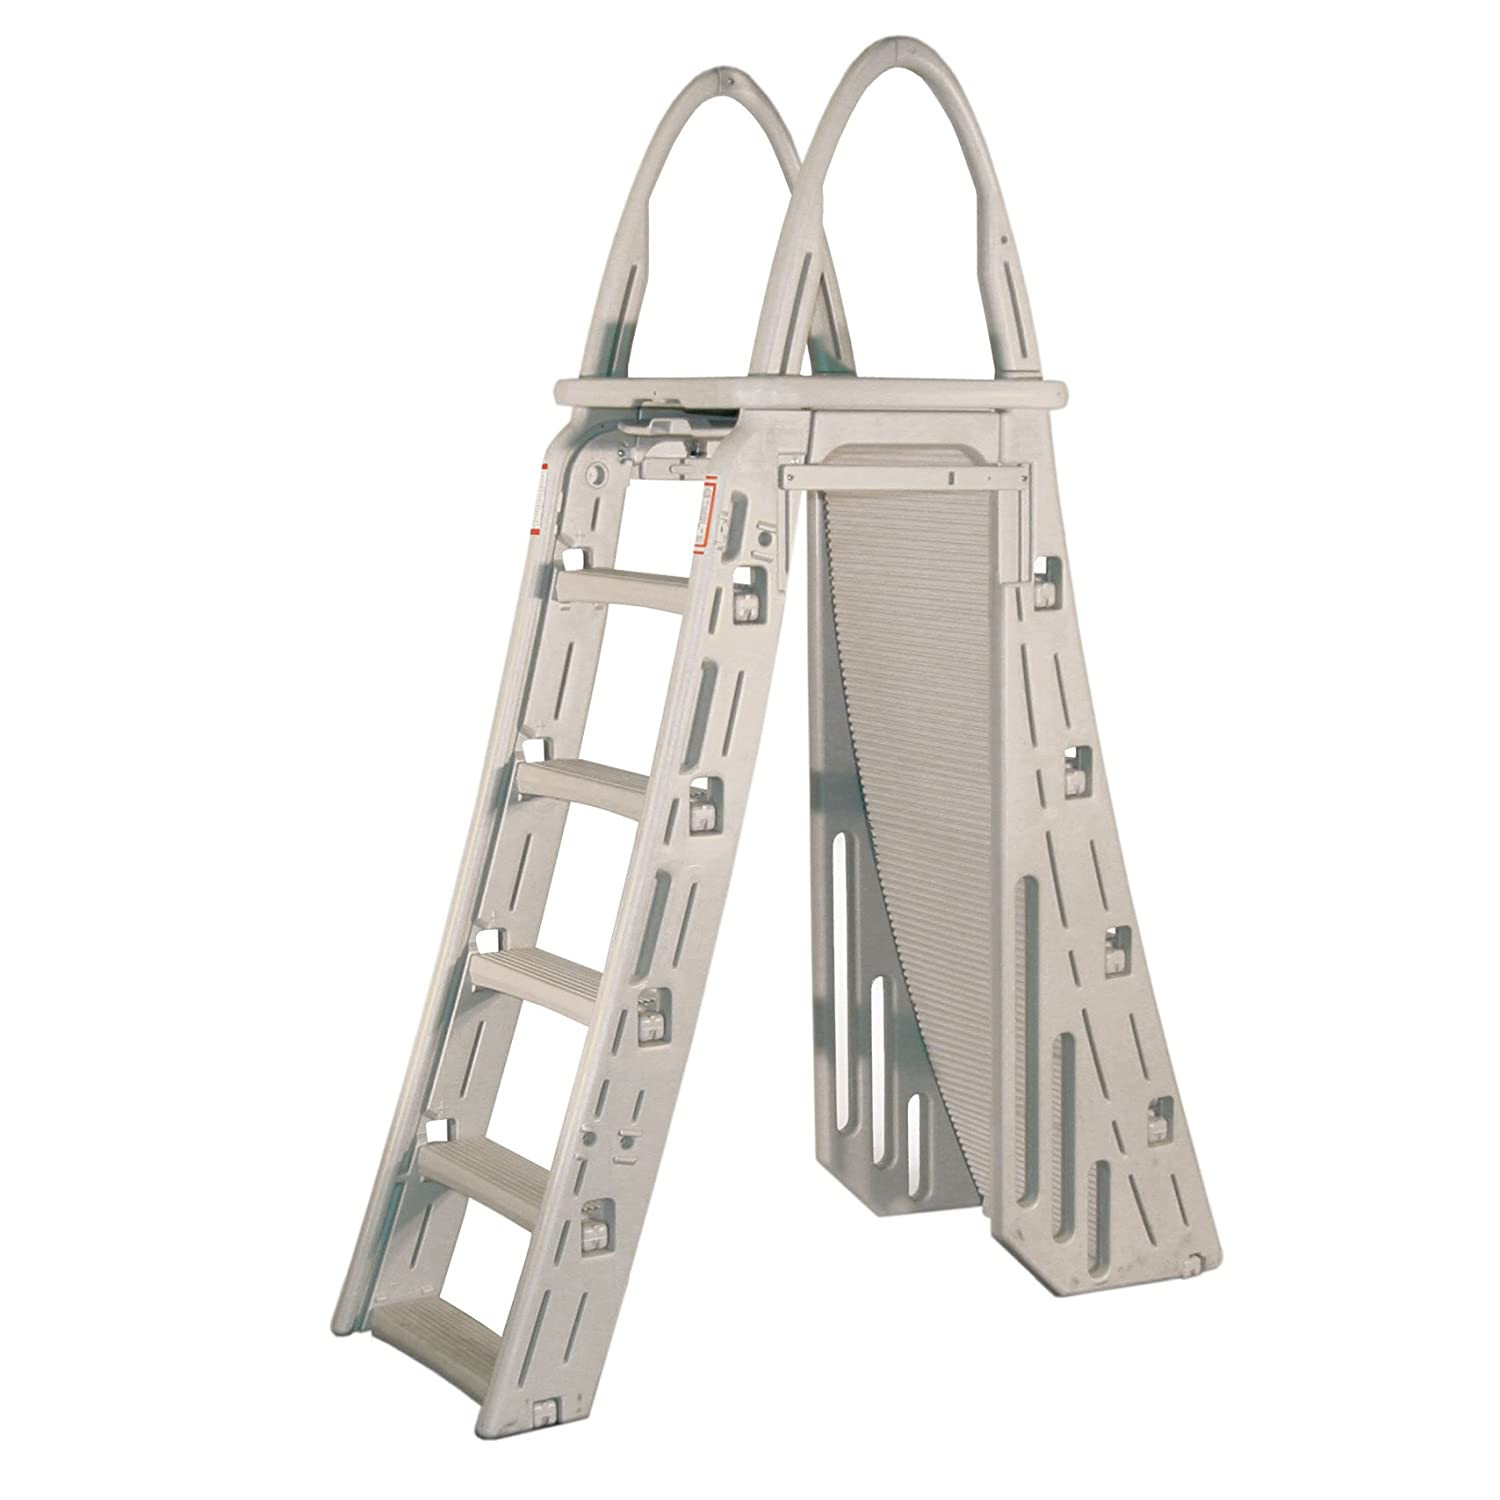 Above Ground Pool Ladder
 Best Ground Pool Ladders and Staircases Reviews 2019